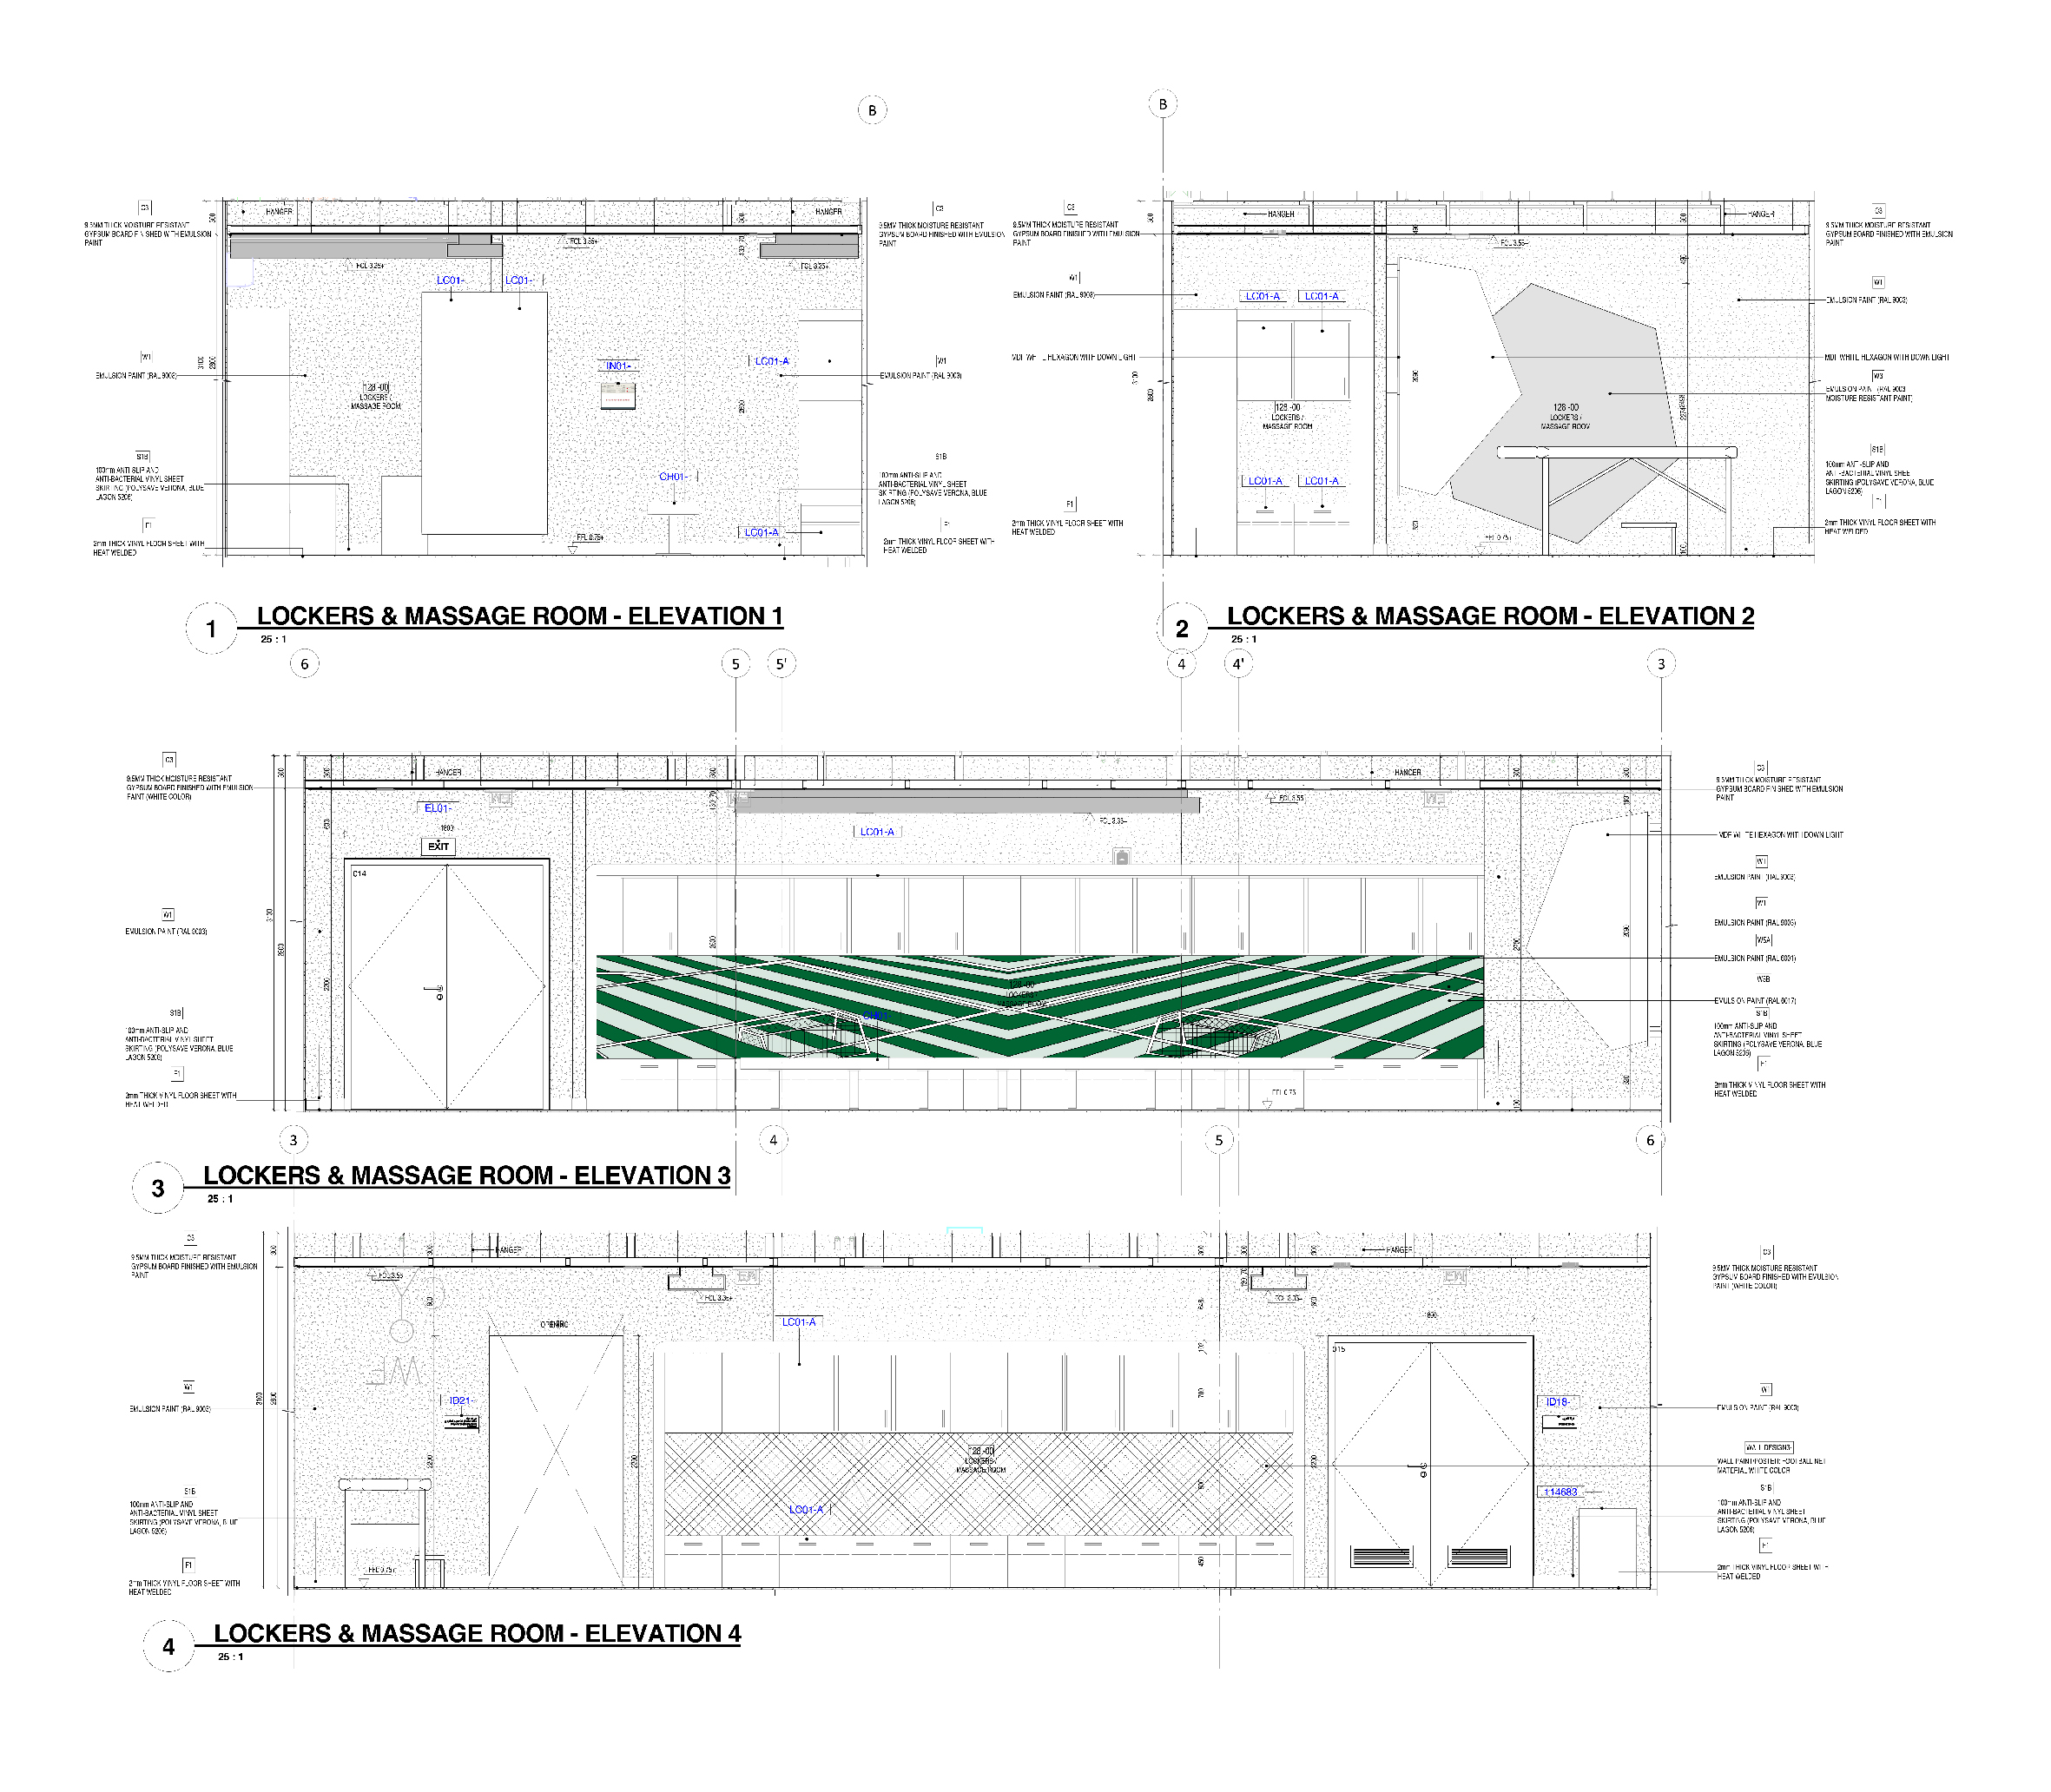 BIM model for the training stadiums in the Qatar World Cup for CORDOBA-212, with a total area of 900 m², 2018